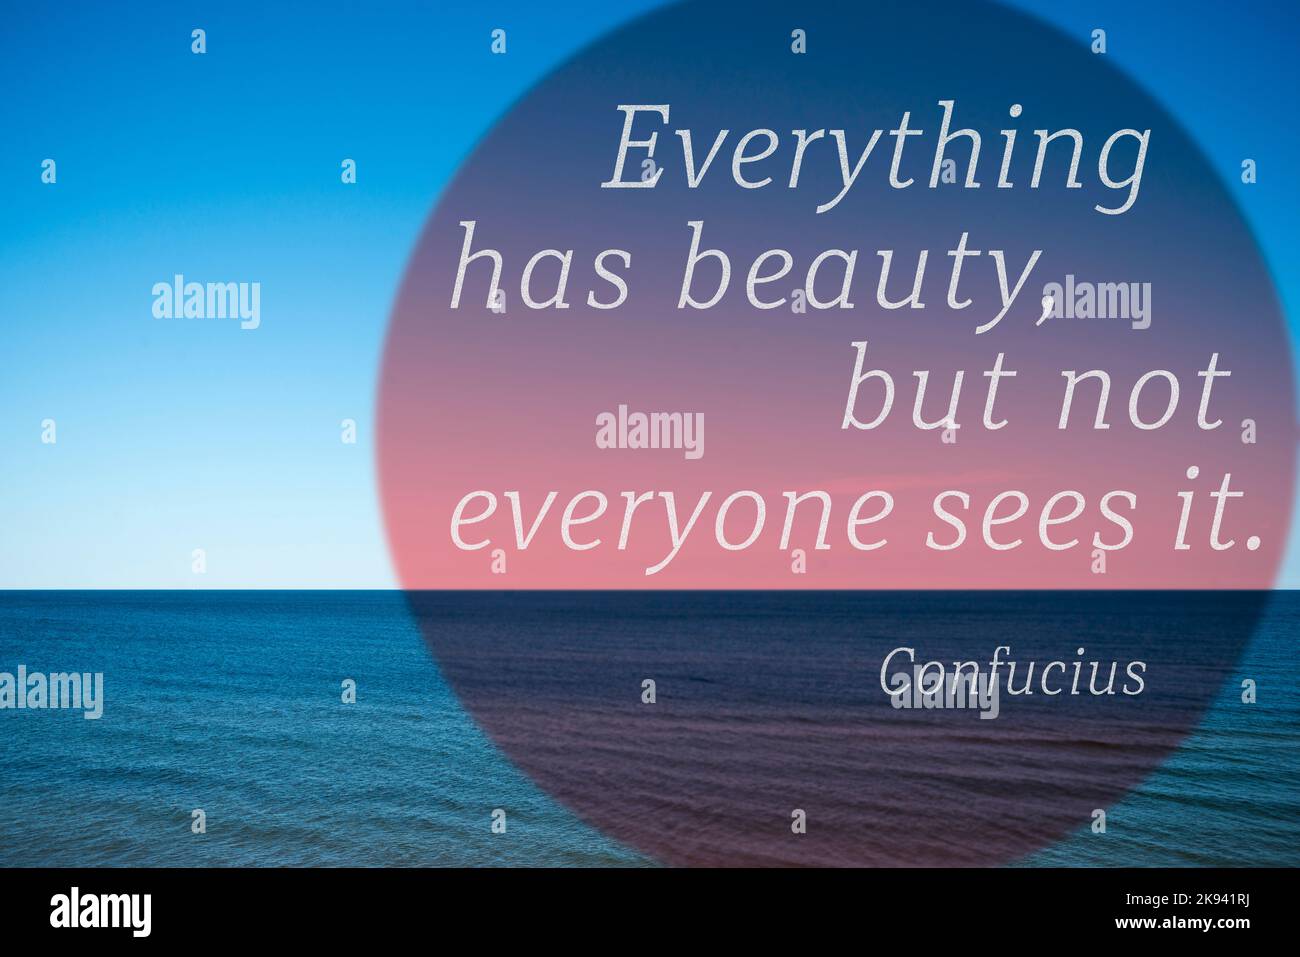 Everything has beauty, but not everyone sees it - quote of ancient Chinese philosopher Confucius  printed over photo with calm sea landscape Stock Photo